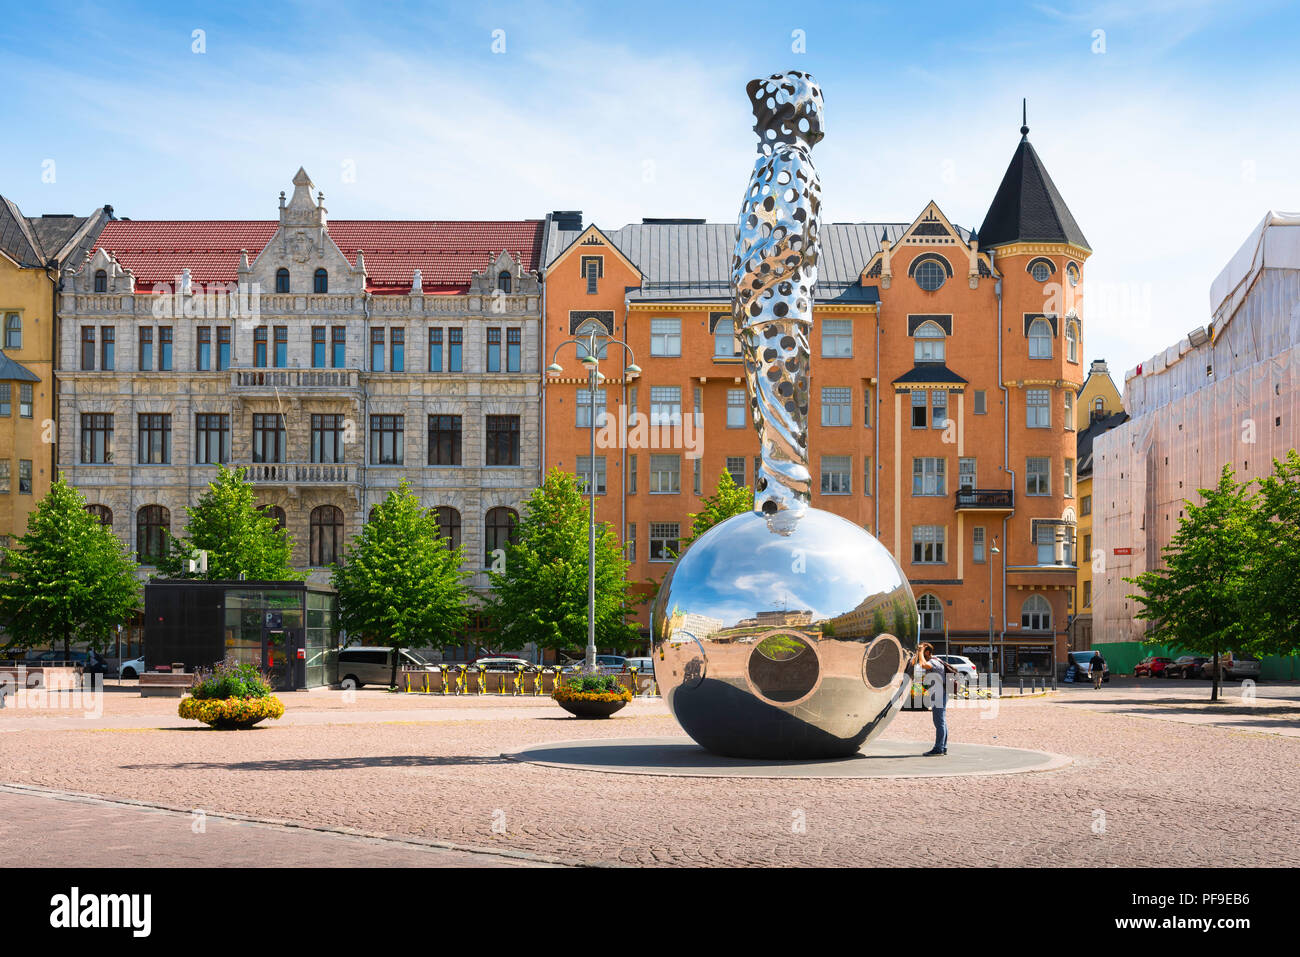 Helsinki architecture Finland, view of Art Nouveau styled buildings and the huge steel Lightbringer monument sited in Kasarmitori square in Helsinki. Stock Photo